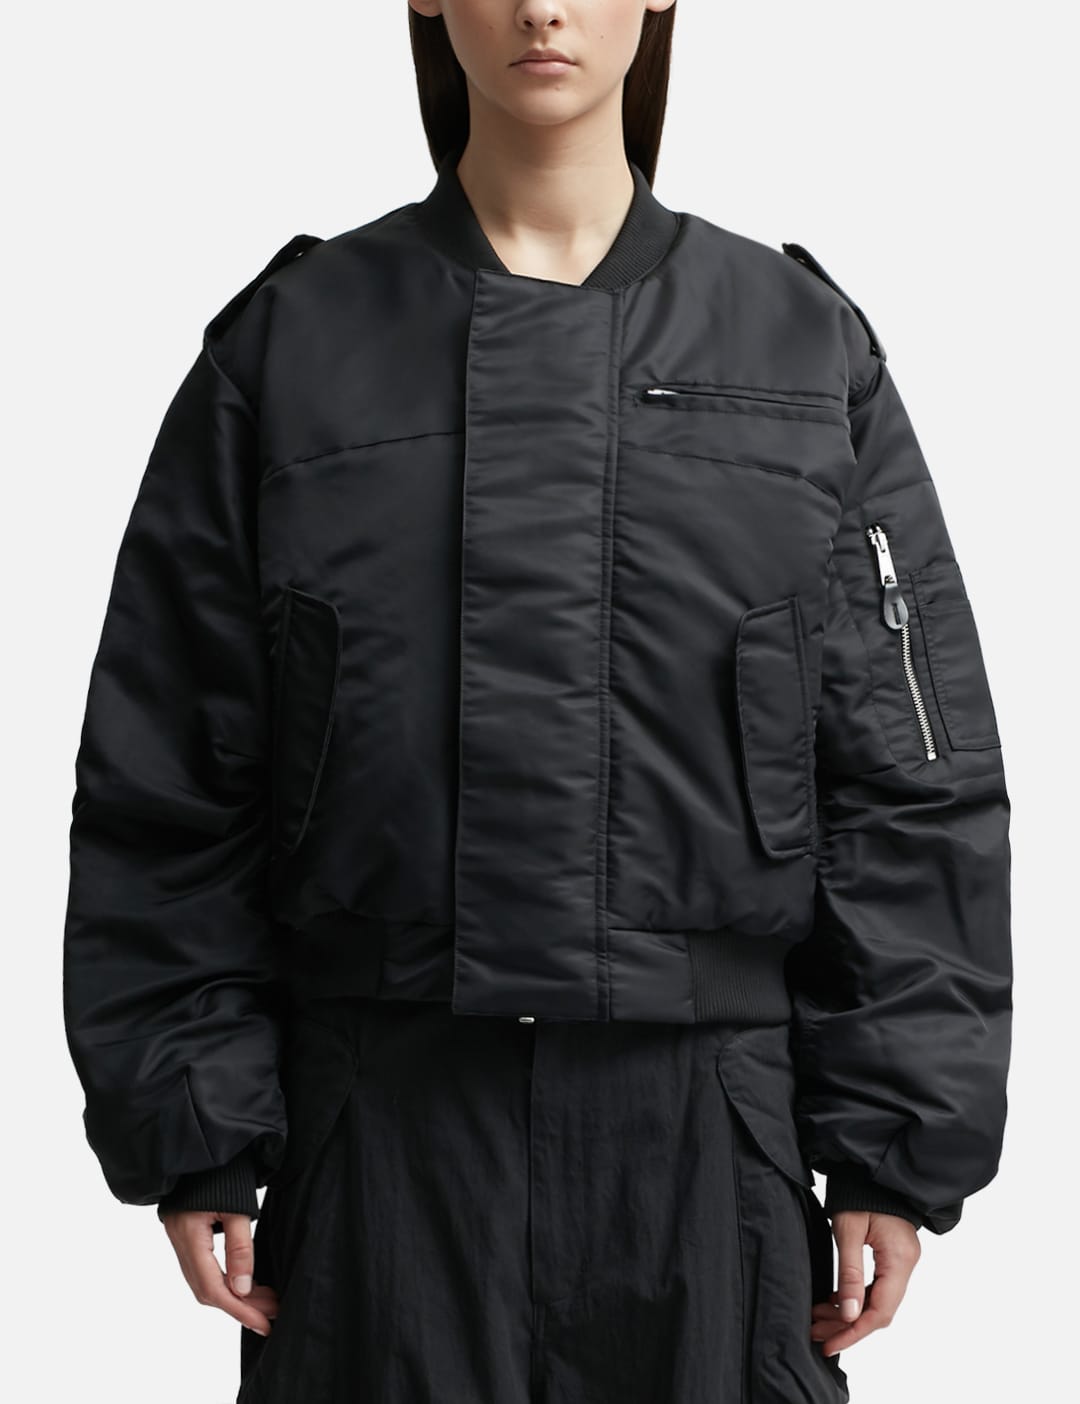 Entire Studios - A-2 Bomber Jacket | HBX - Globally Curated 